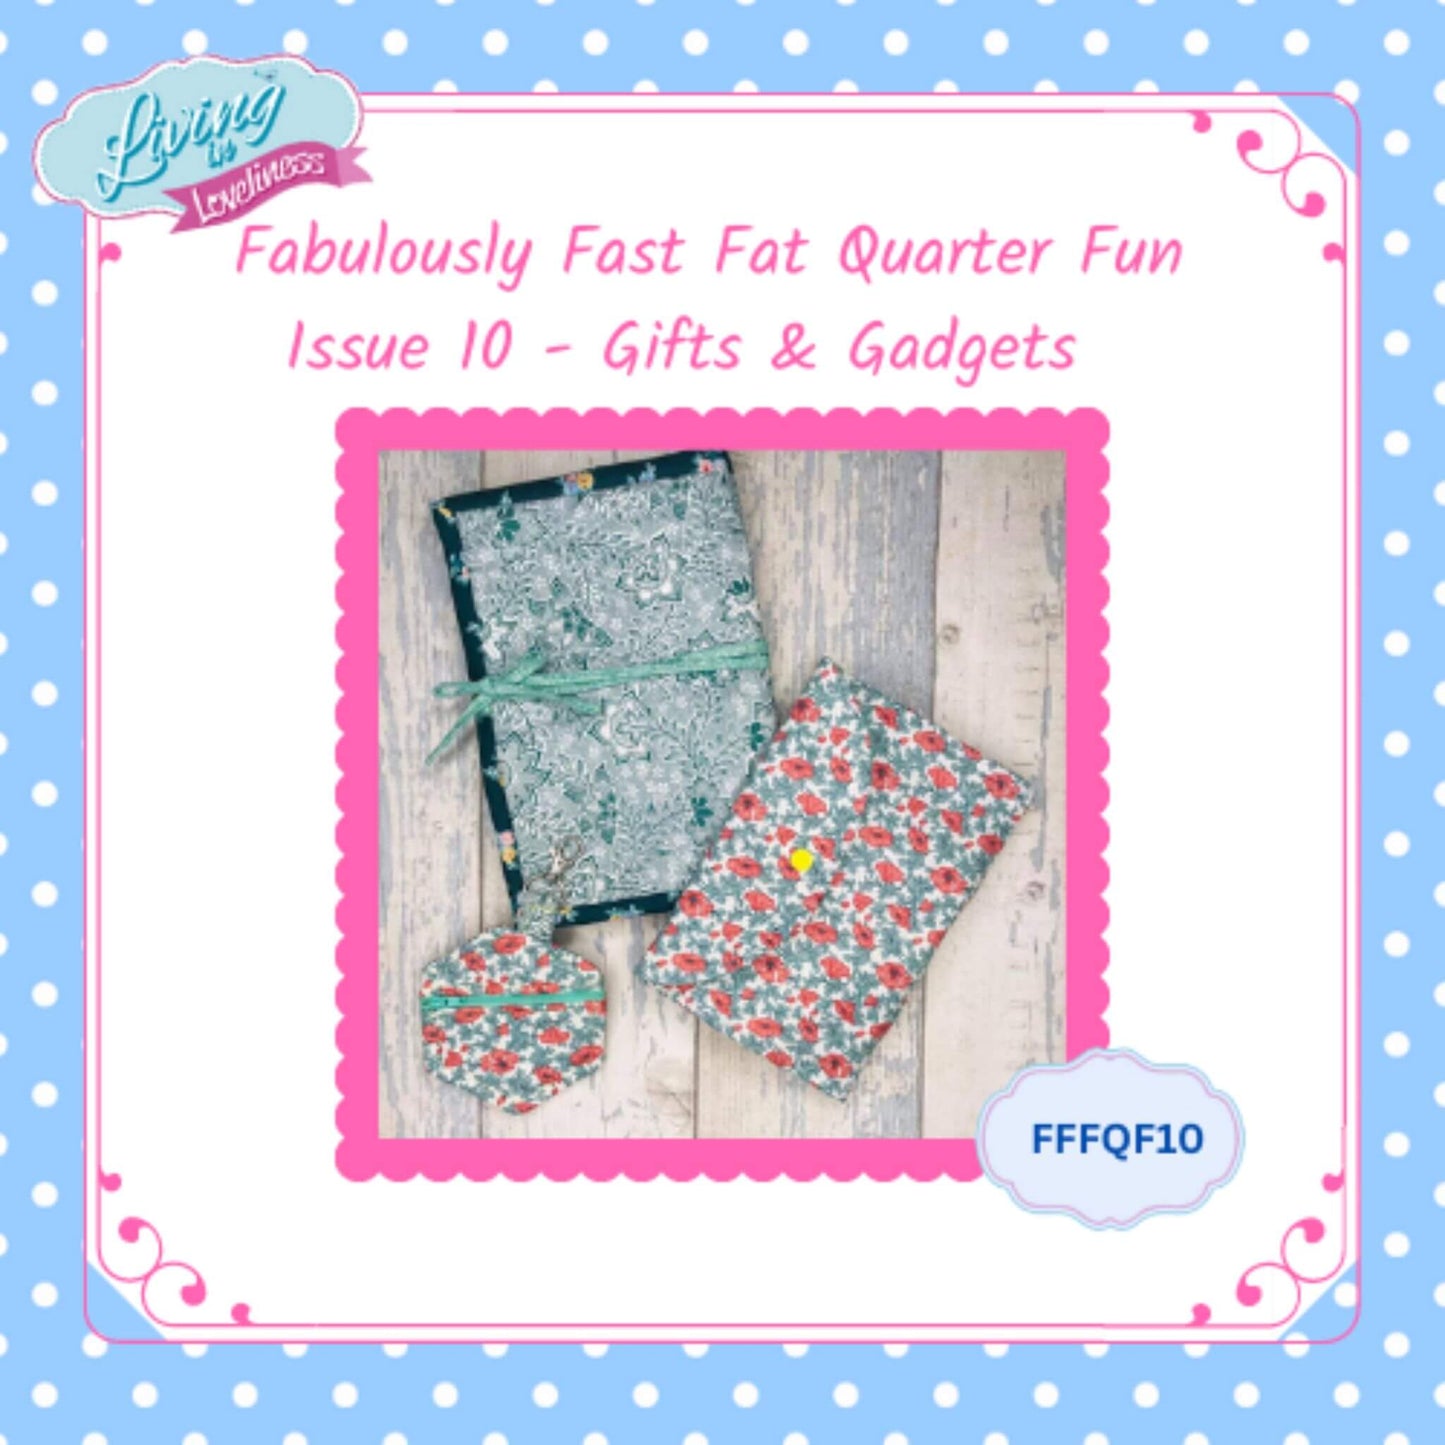 Issue 10 - Gifts & Gadgets - The Fabulously Fast Fat Quarter Fun Series by Living in Loveliness